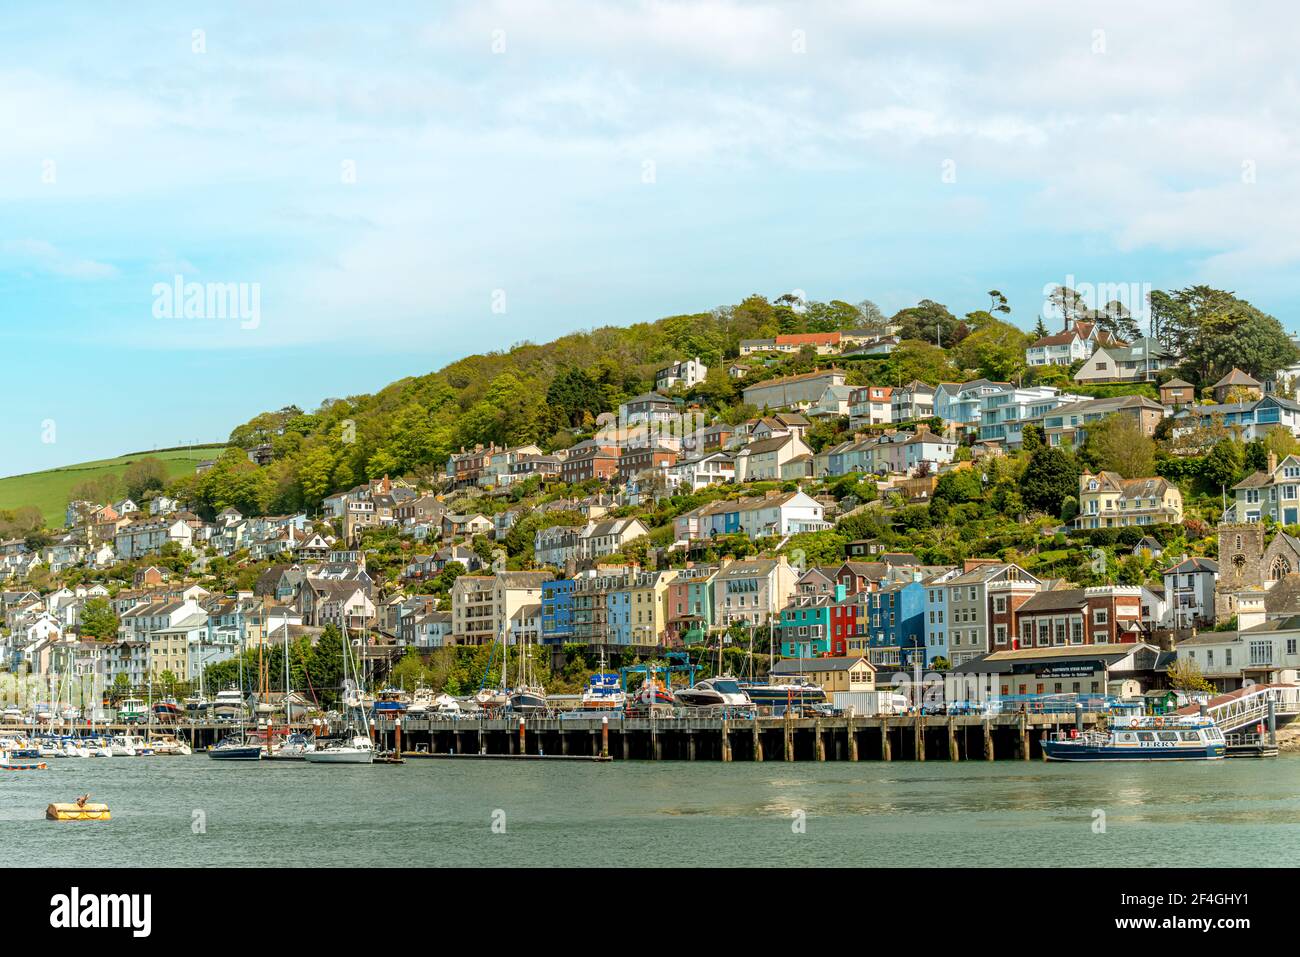 Colourful houses at the waterfront of Kingswear seen from Dartmouth, Devon, England, UK Stock Photo